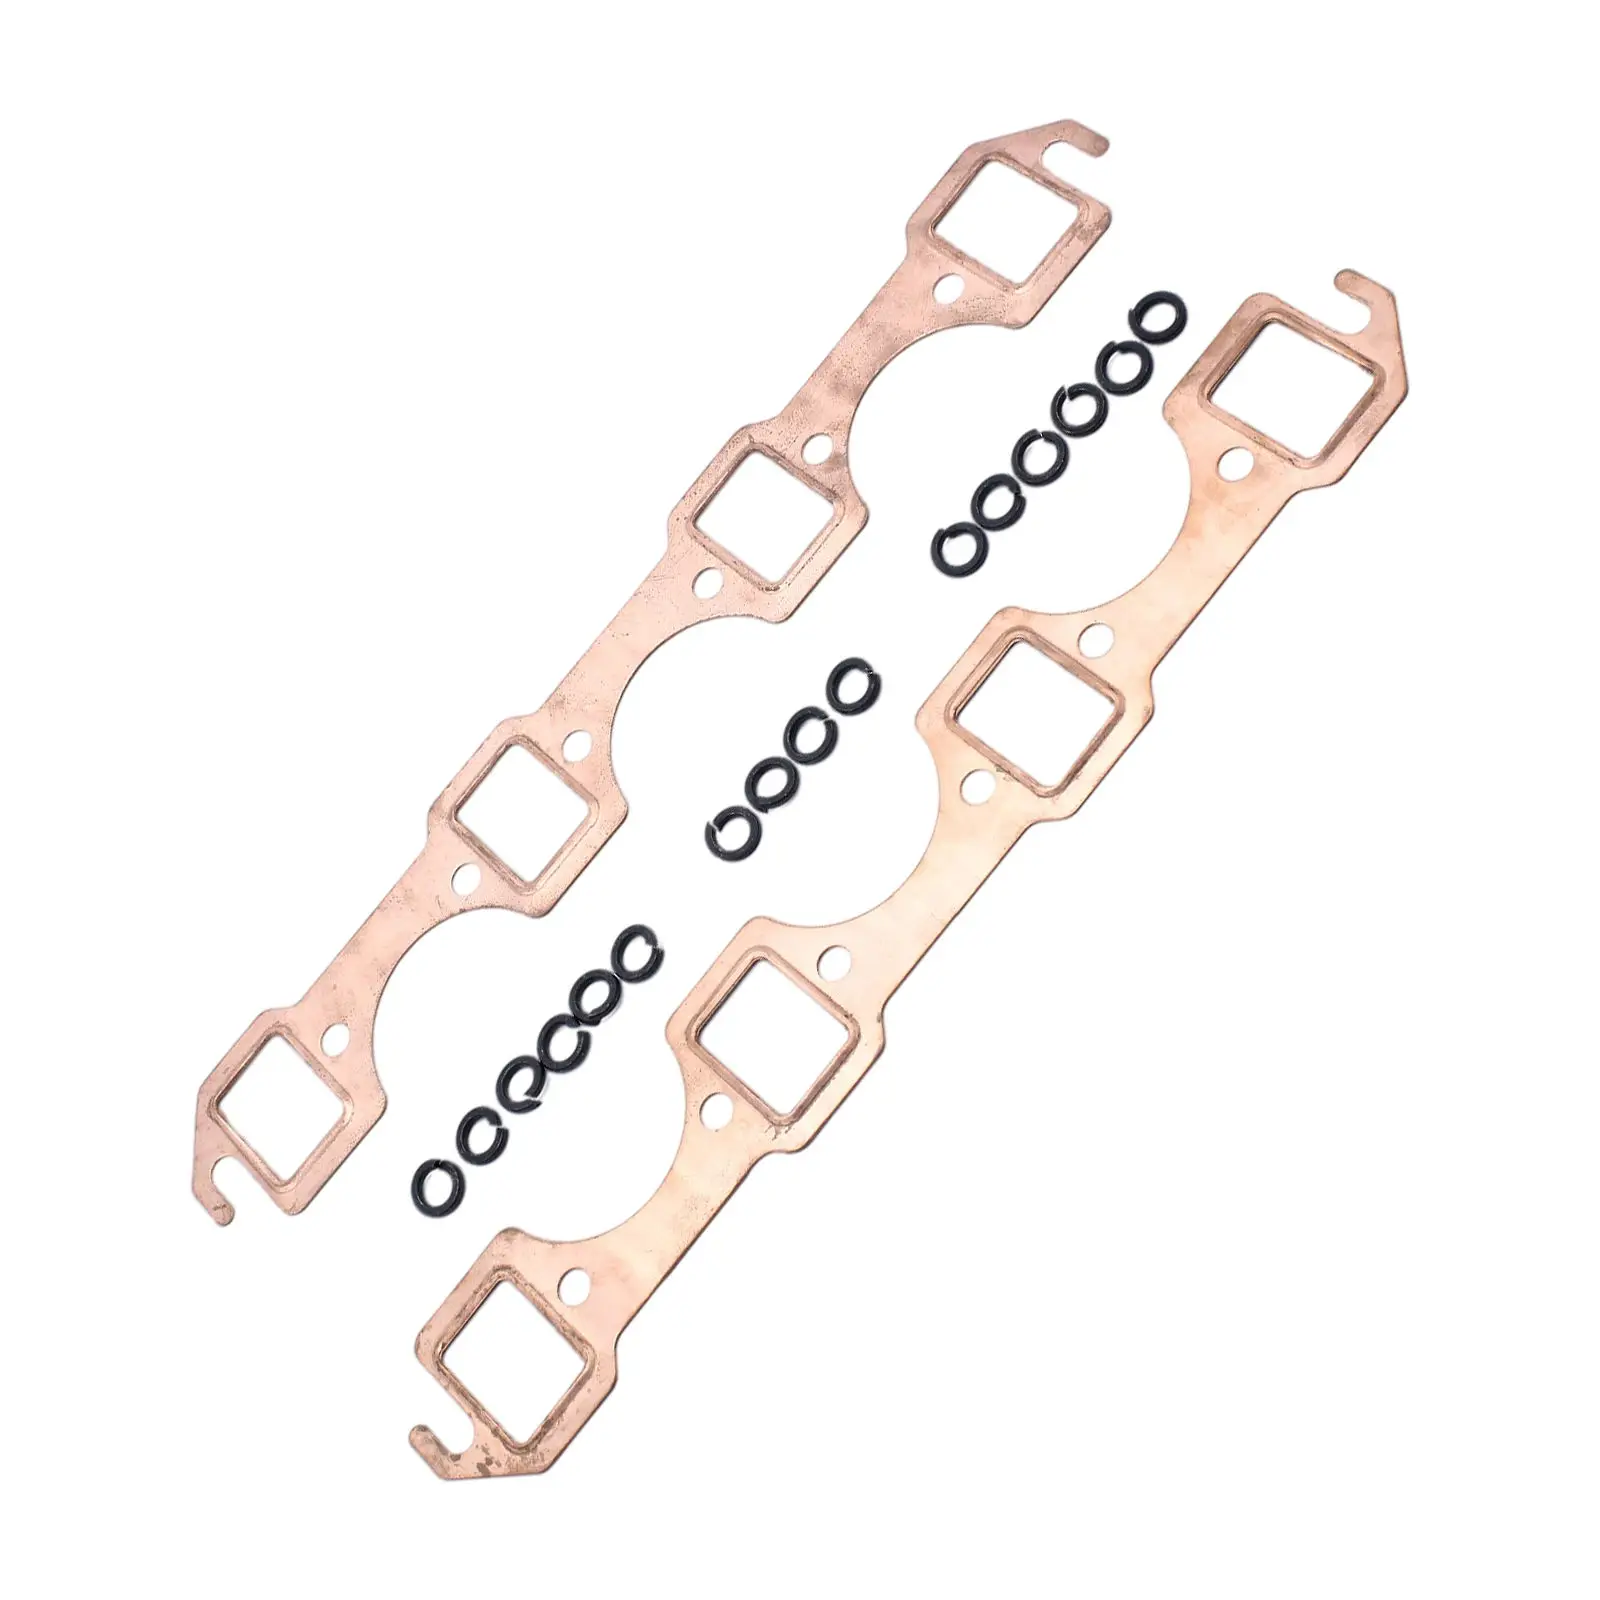 2x Exhaust Header Gaskets Square Gasket Kit Premium Fit for Ford 302 5.0L 1962-1986